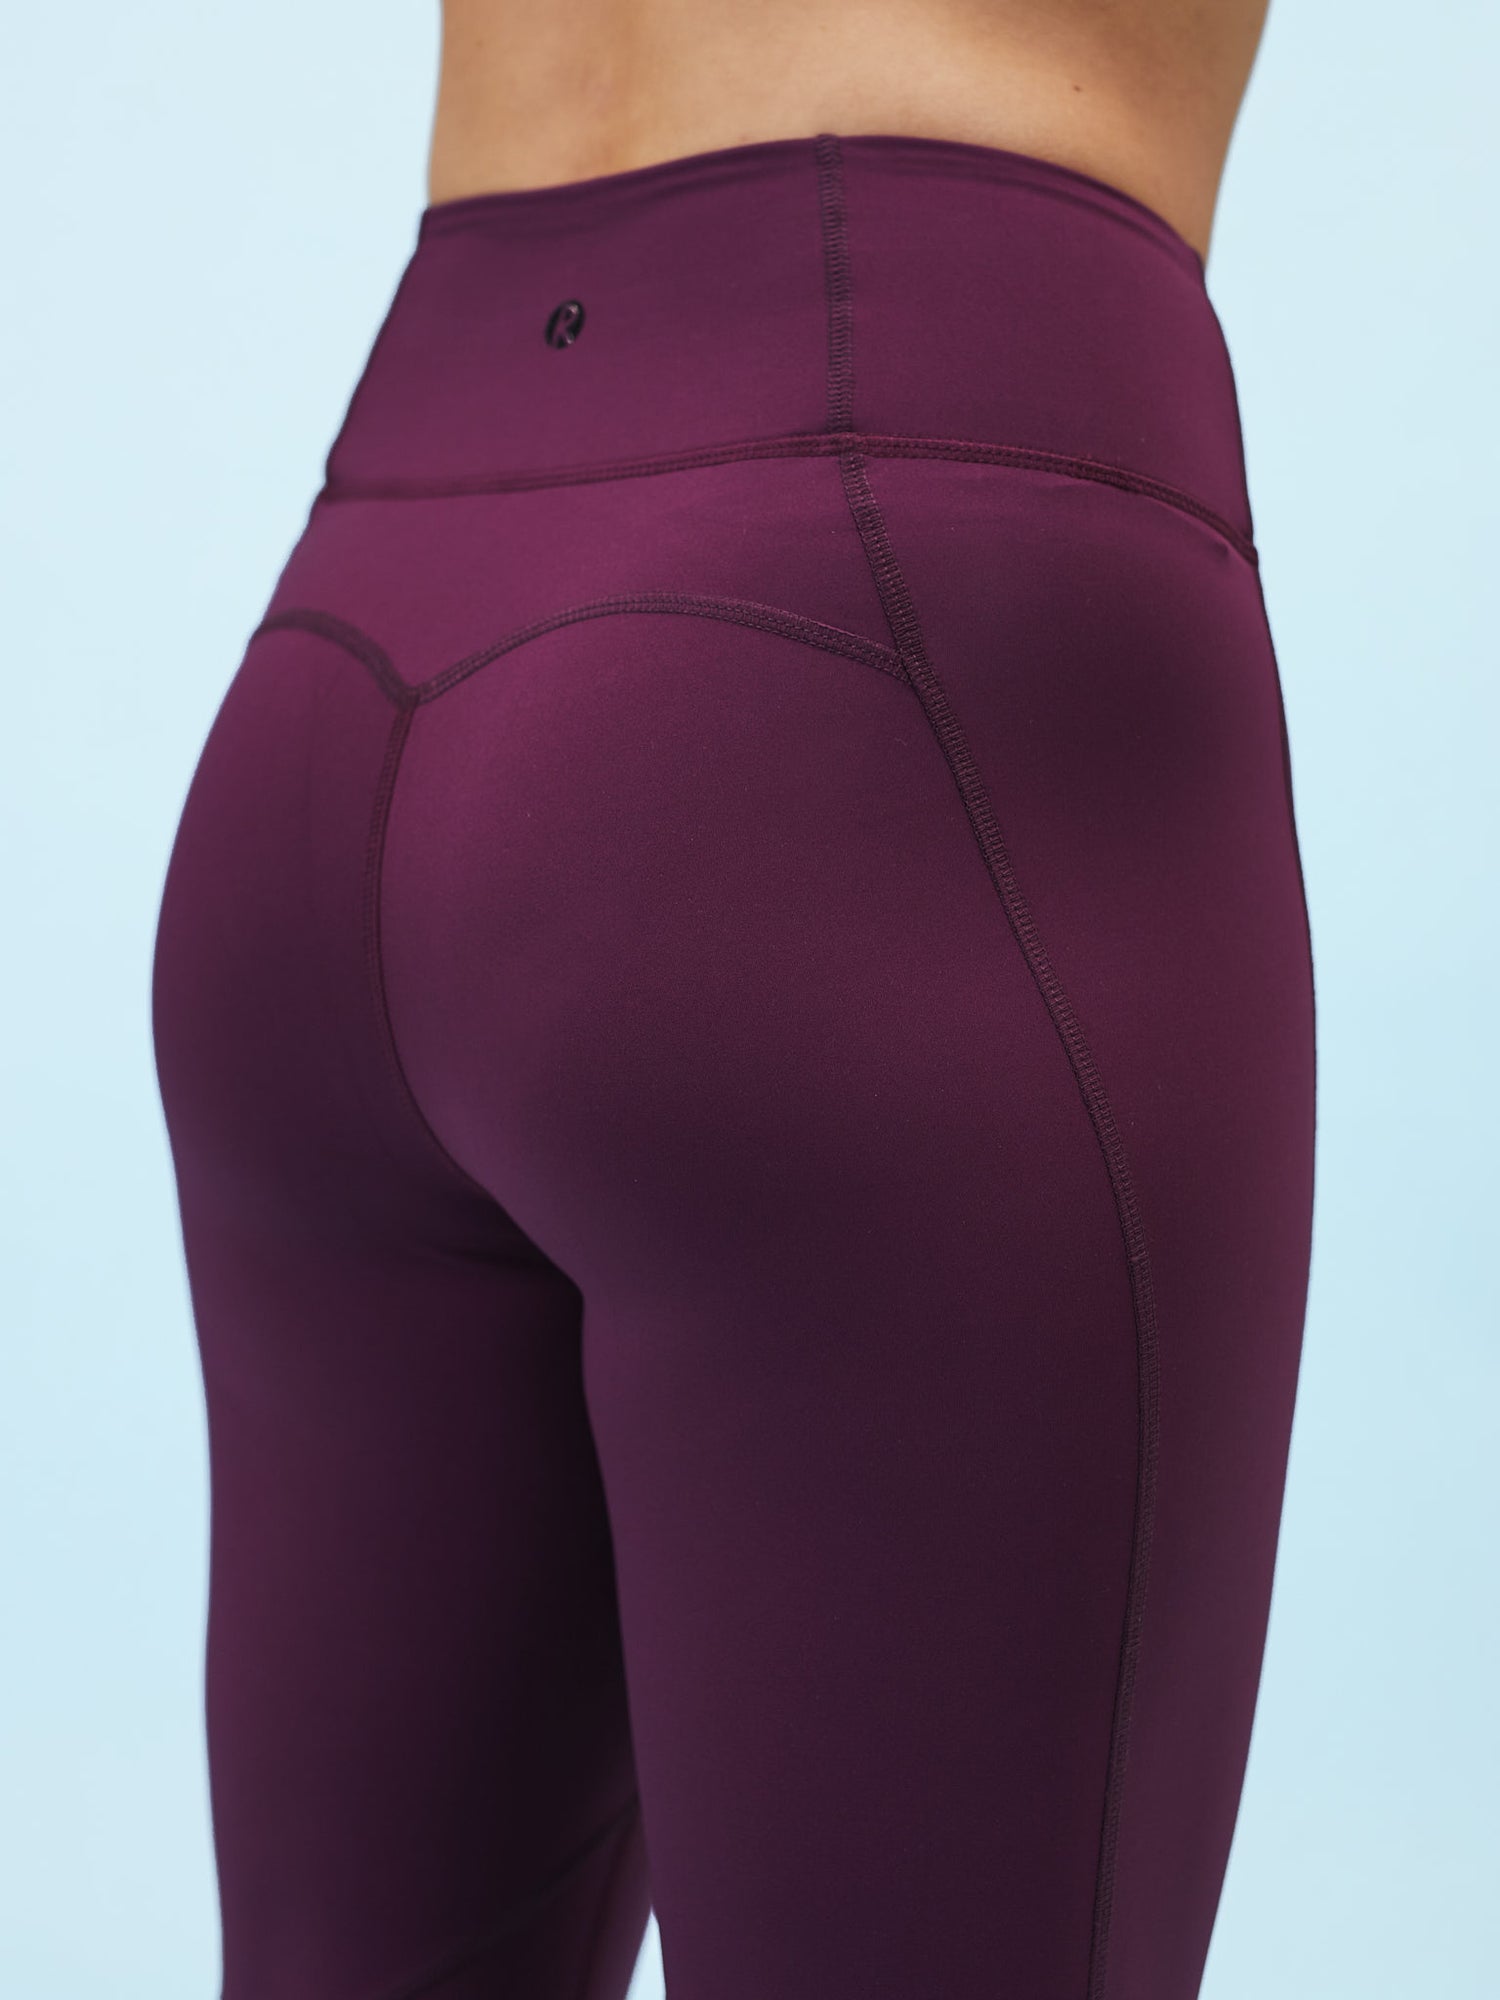 Squat proof? If anyone has these aligns are they squat proof? I've been  eyeing them for so long but I'm scared they're gonna be see through :( : r/ lululemon